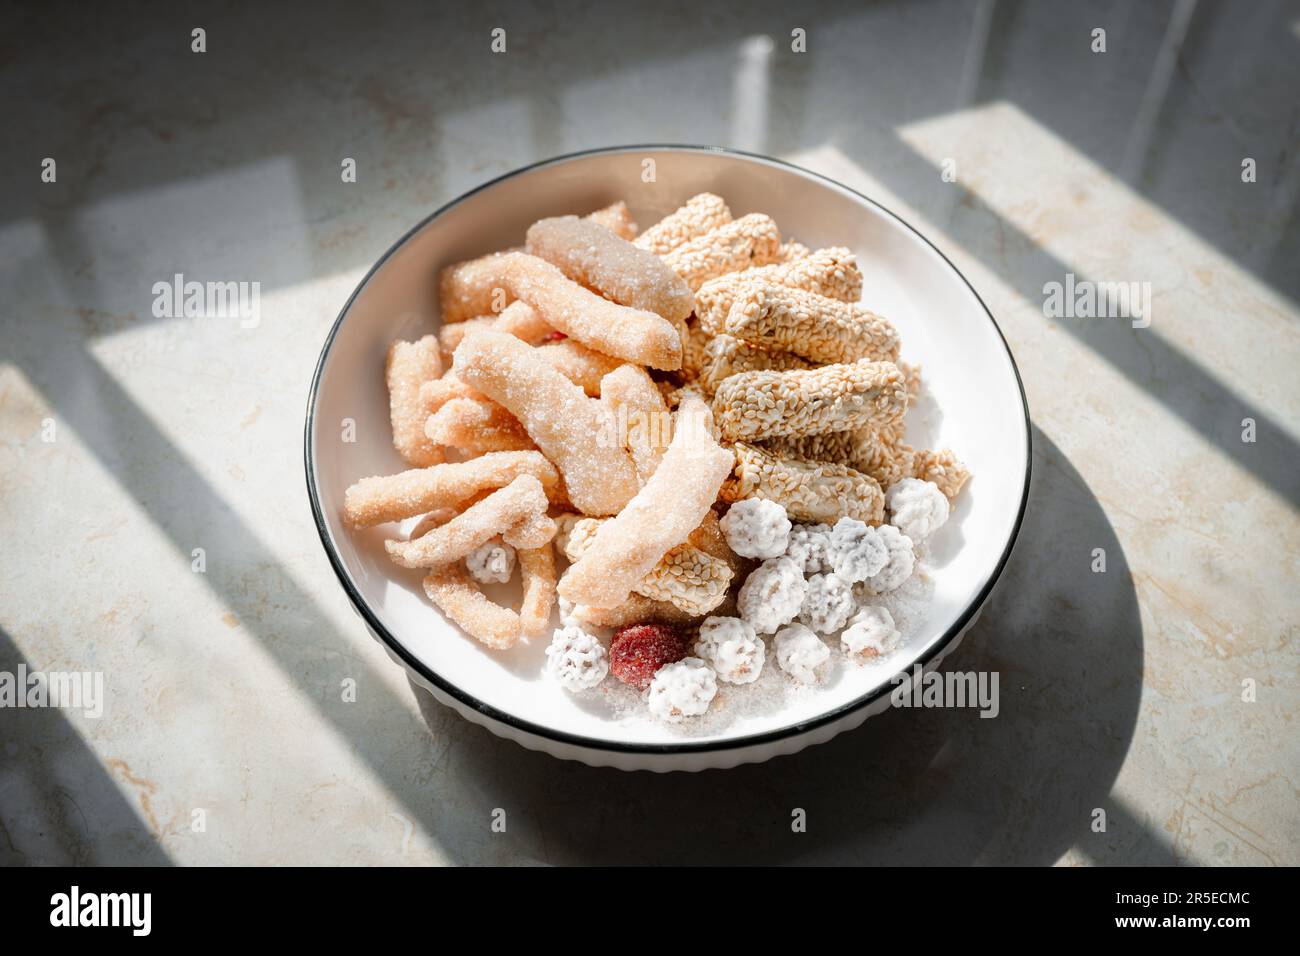 a plate of sweets Stock Photo